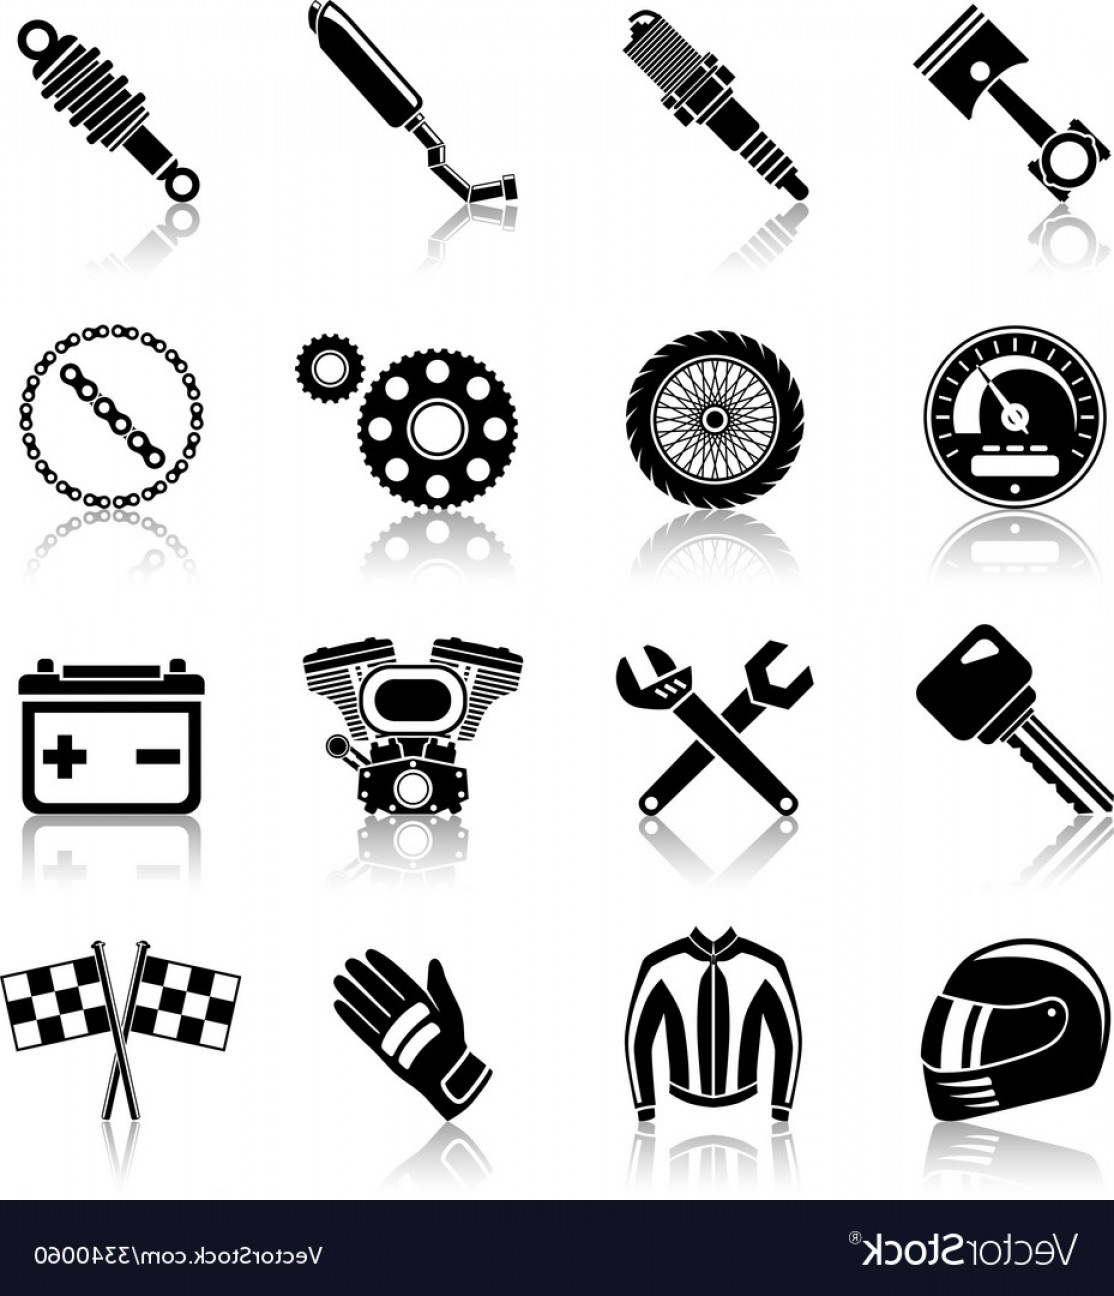 Download Motorcycle Parts Vector at Vectorified.com | Collection of ...